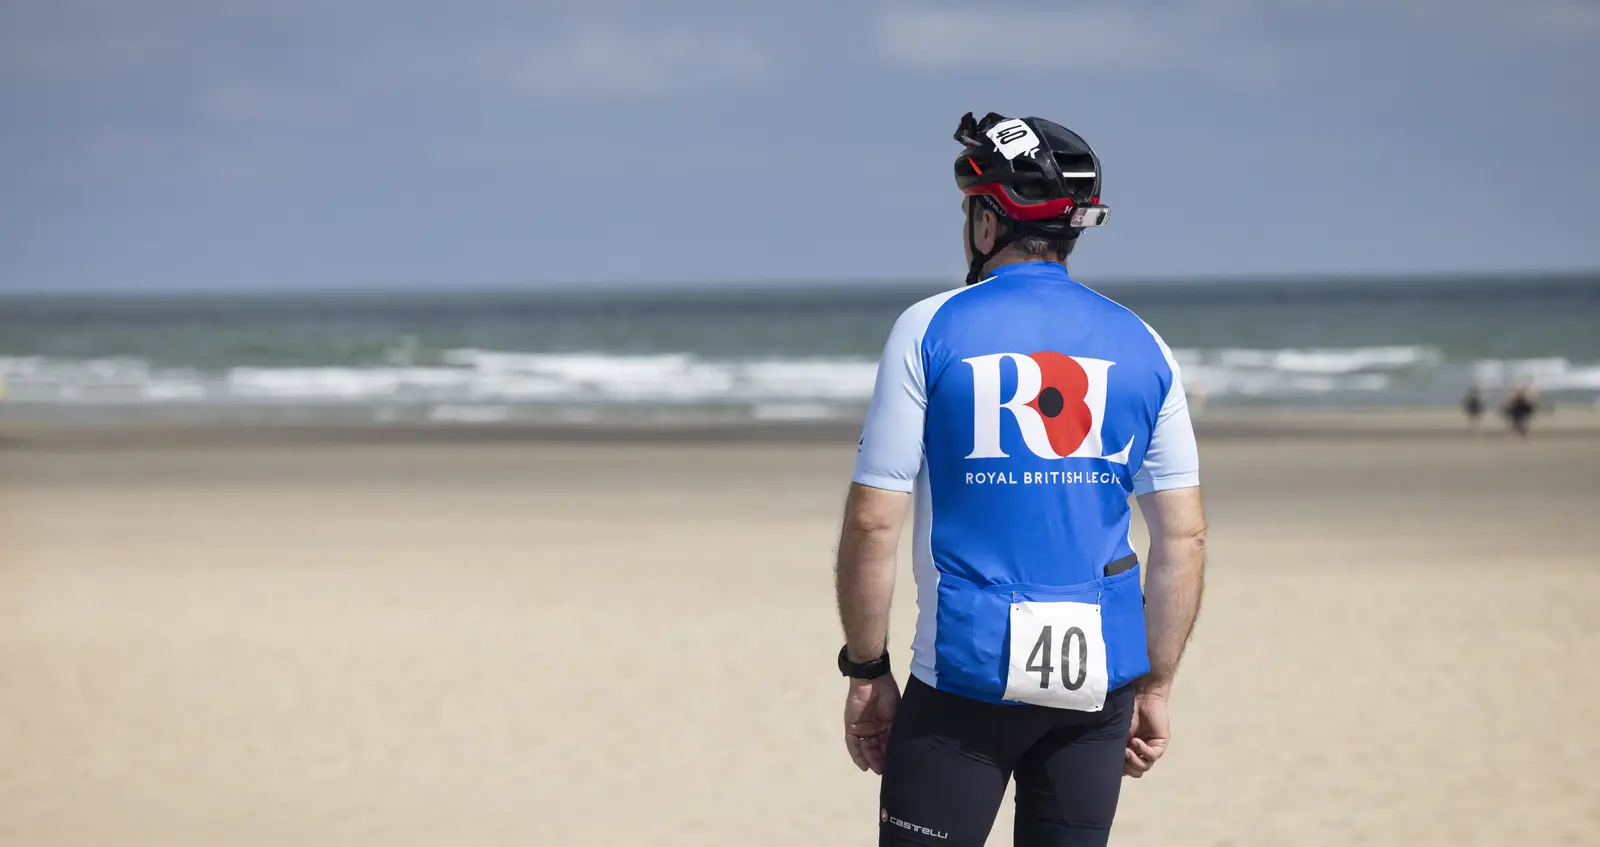 Pedal to Ypres cyclist on beach